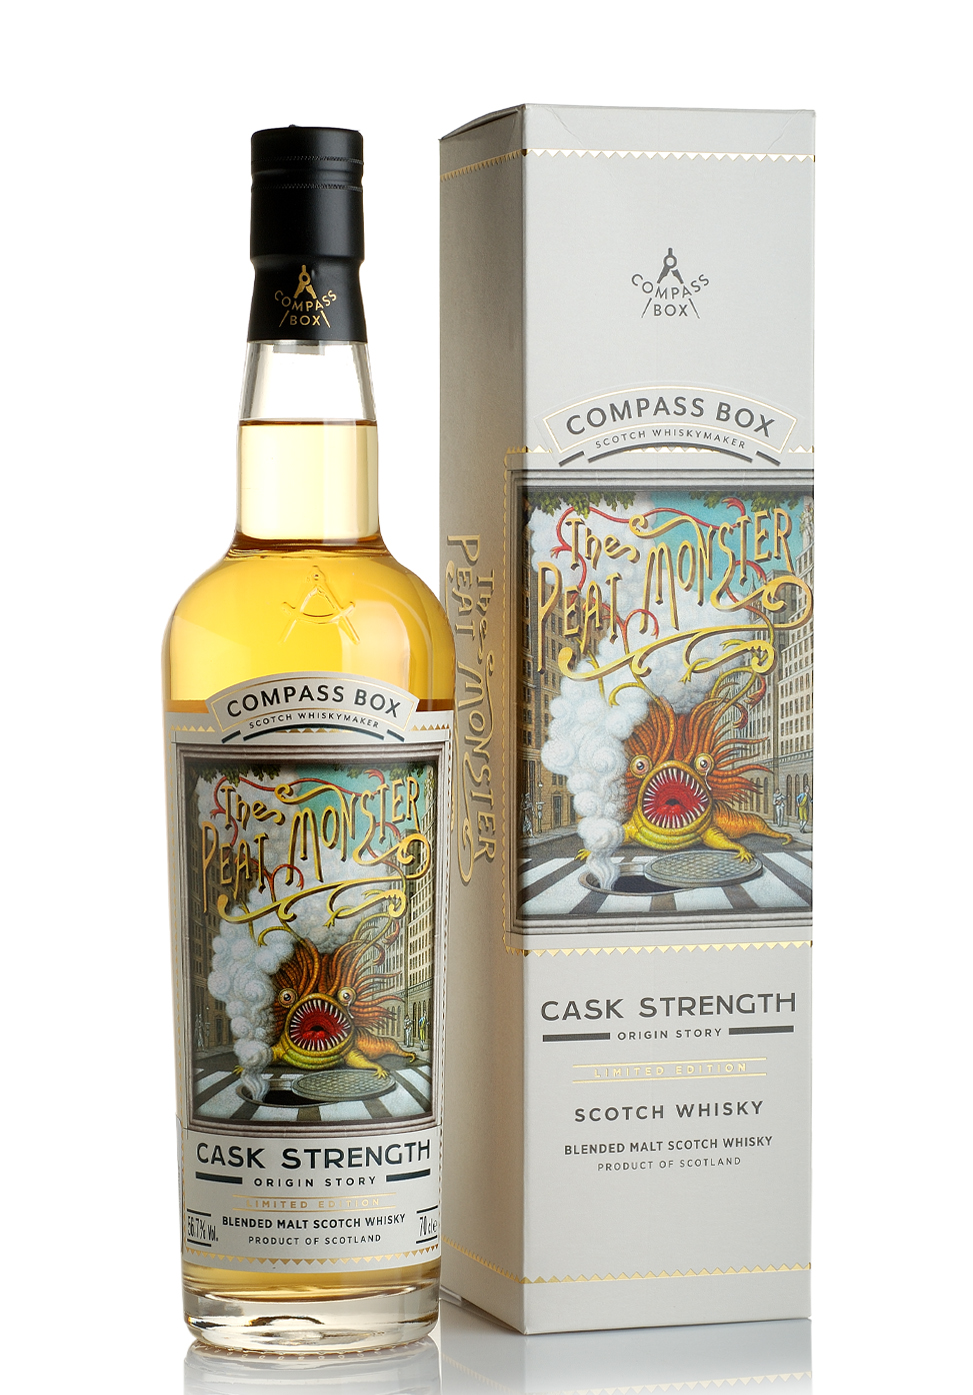 Whisky Compass Box The Peat Monster Cask Strength 57.6% (0.7L) Image